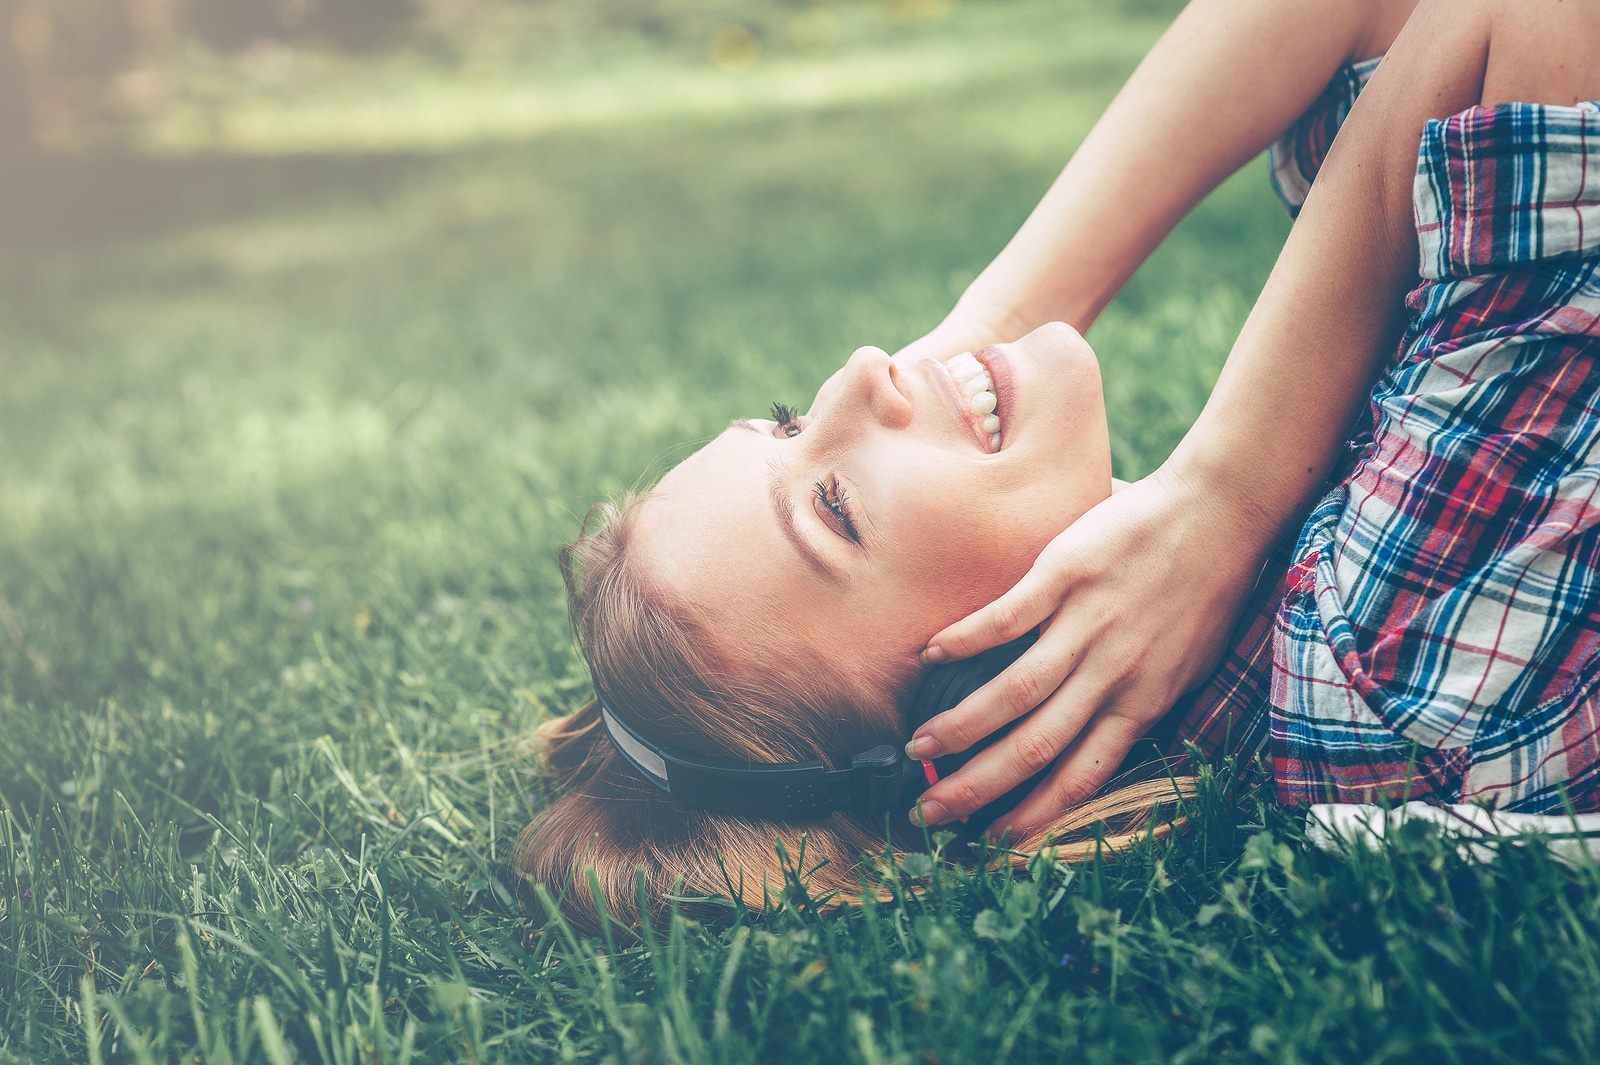 Enjoying her favorite music. Side view of beautiful young woman in headphones listening to the music and smiling while lying on the green grass